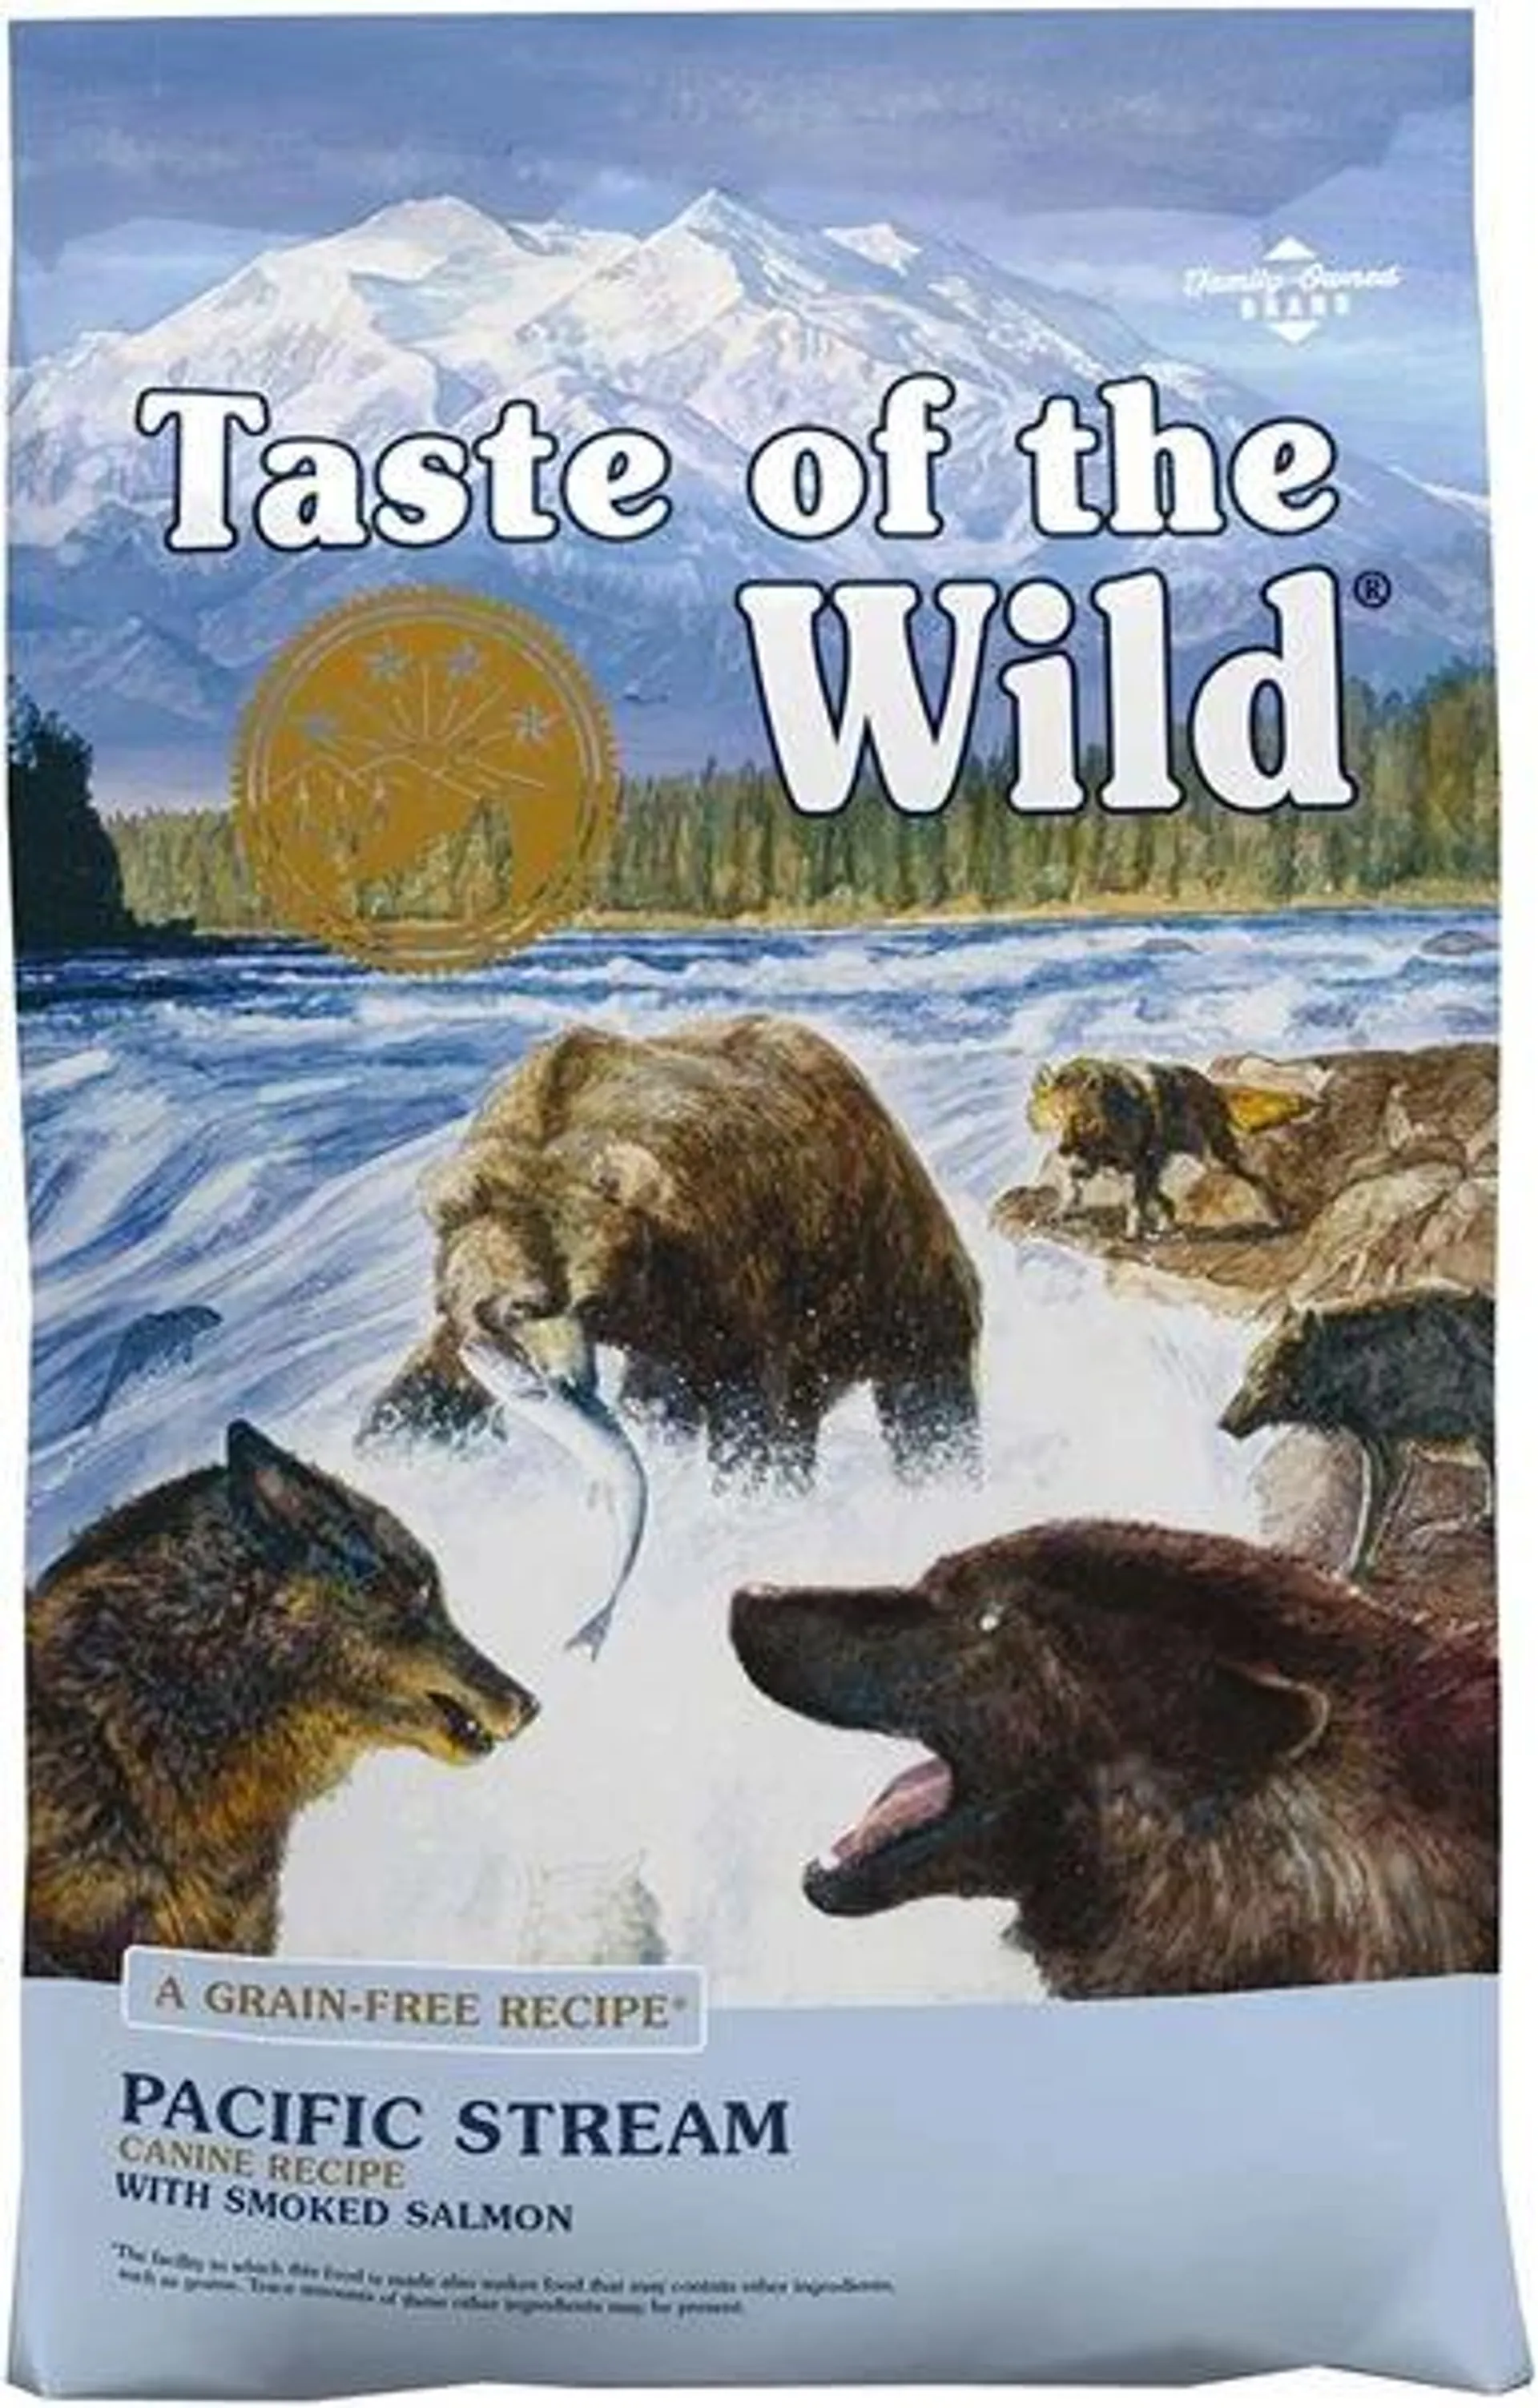 Taste of the Wild® Pacific Stream Canine® Recipe with Smoked Salmon, 28 Pounds